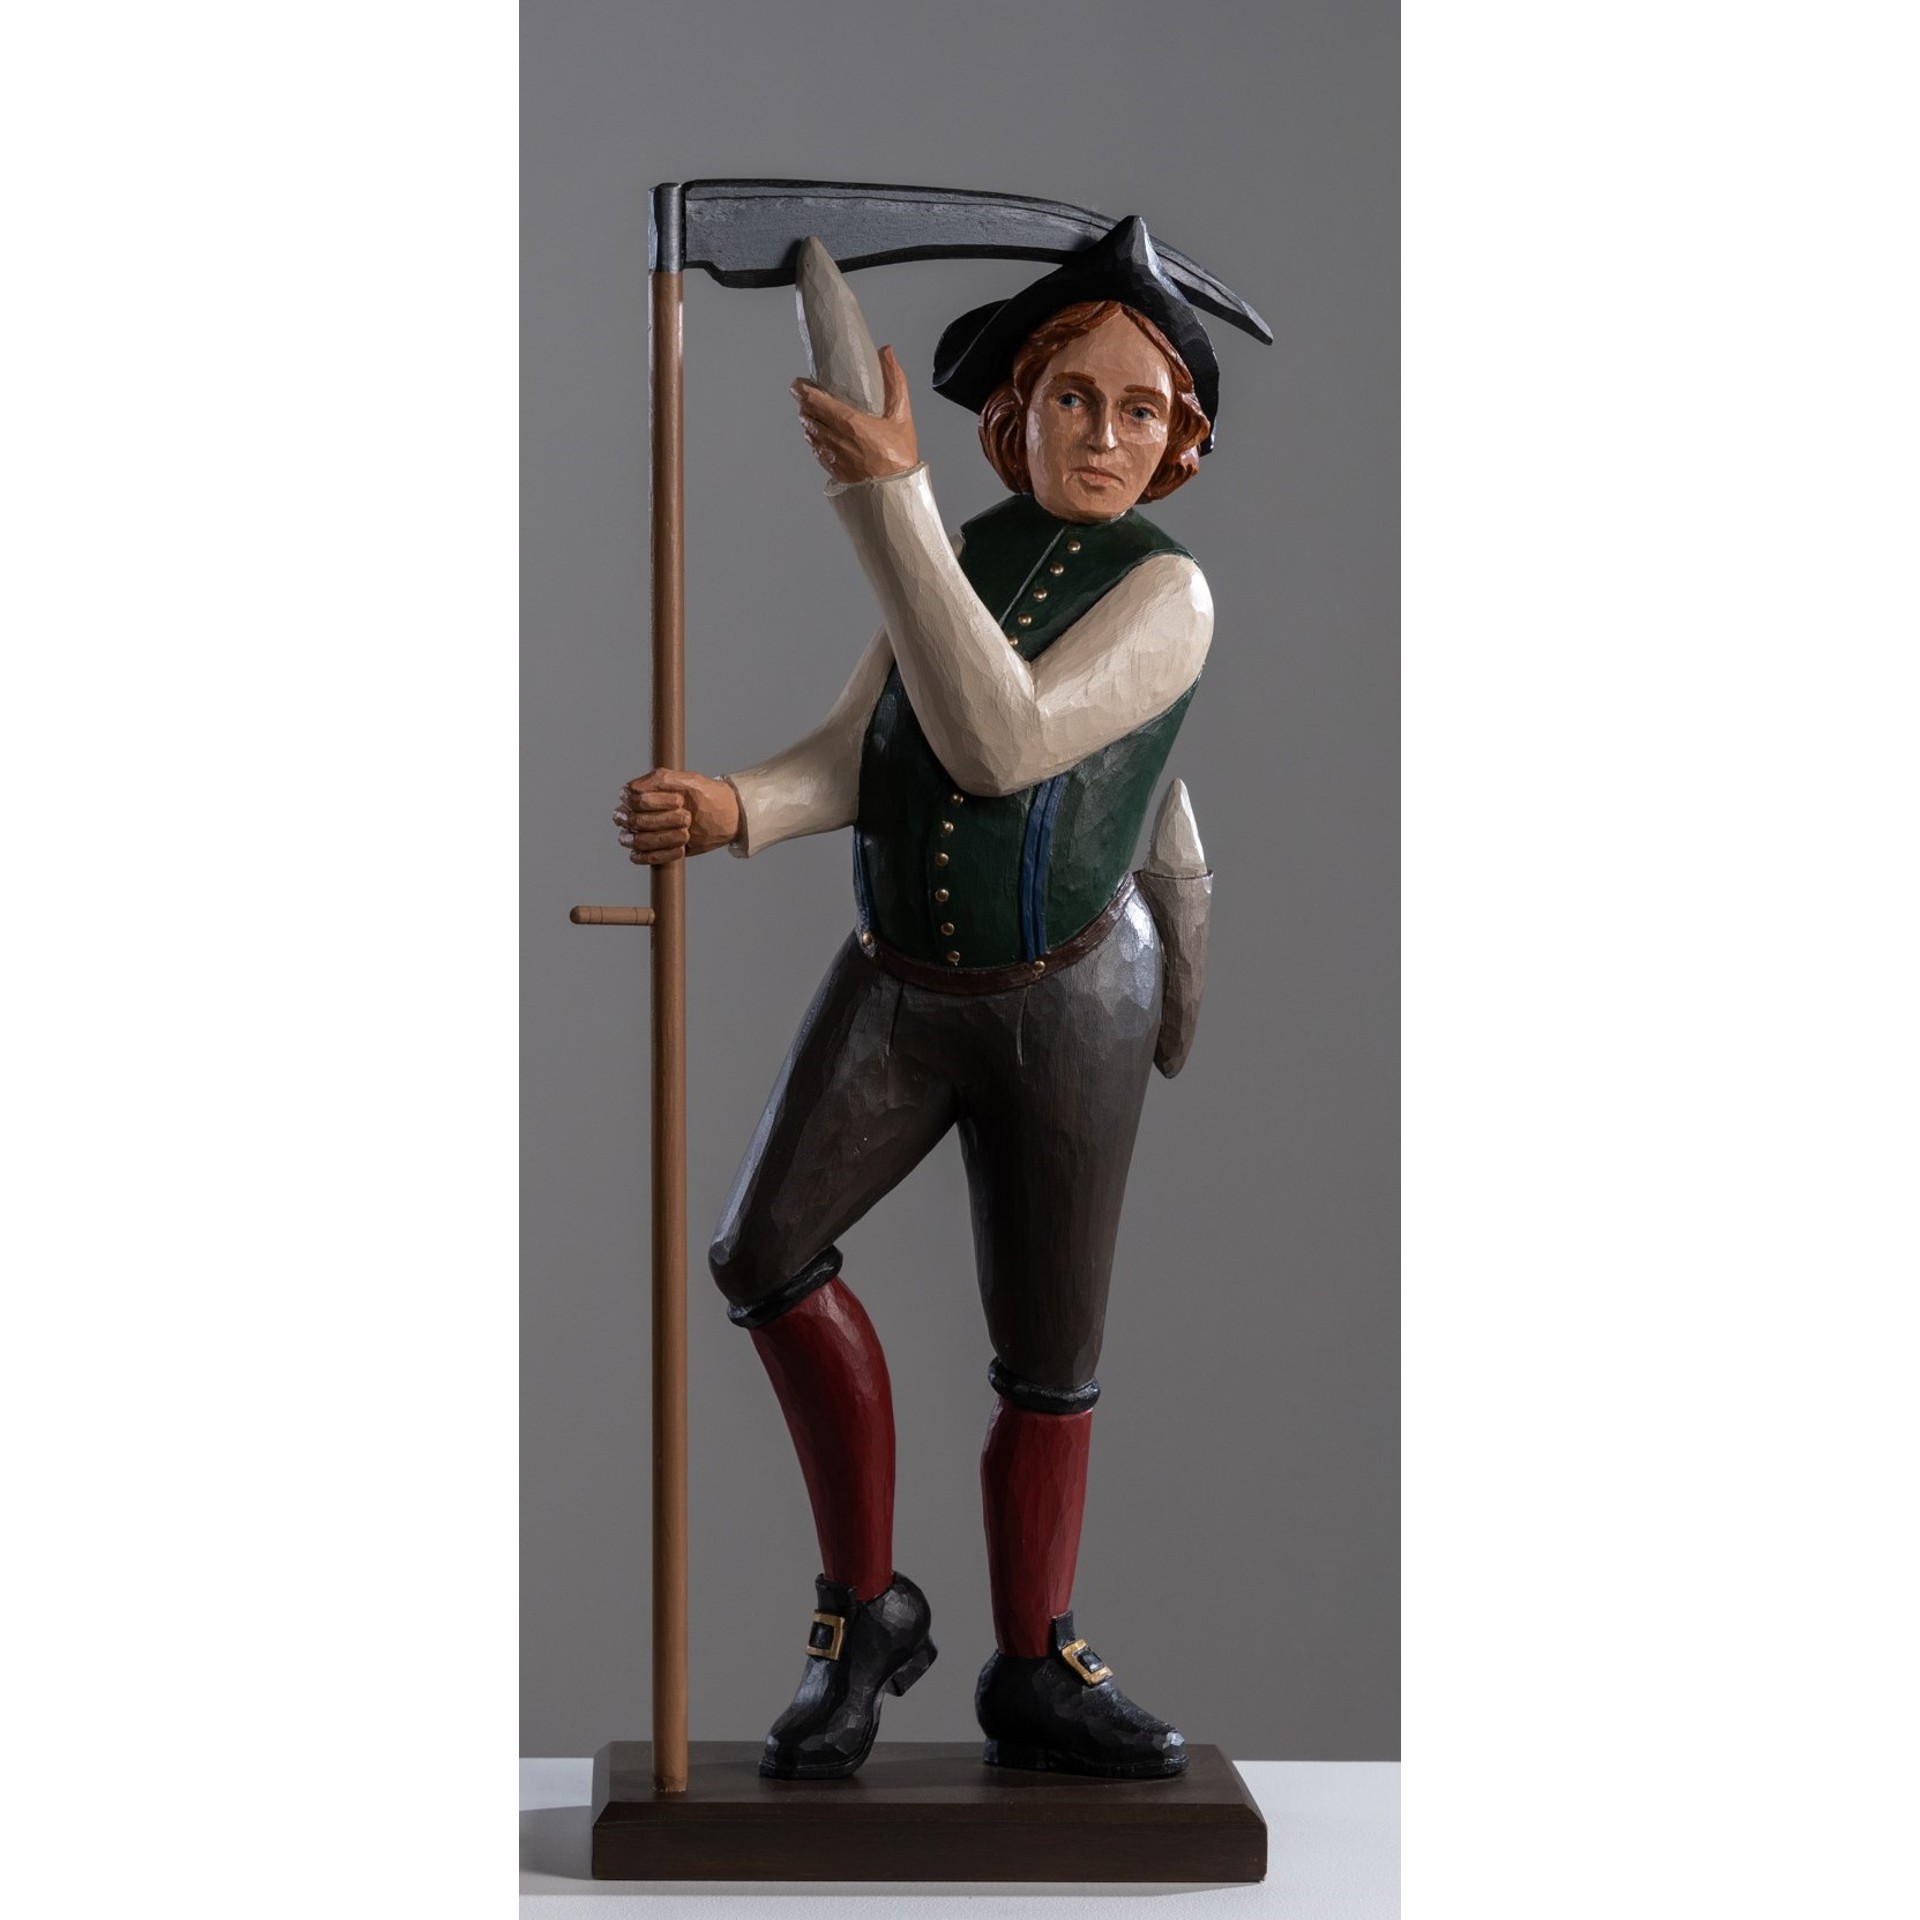 Marshall Rumbaugh carved figure rel=